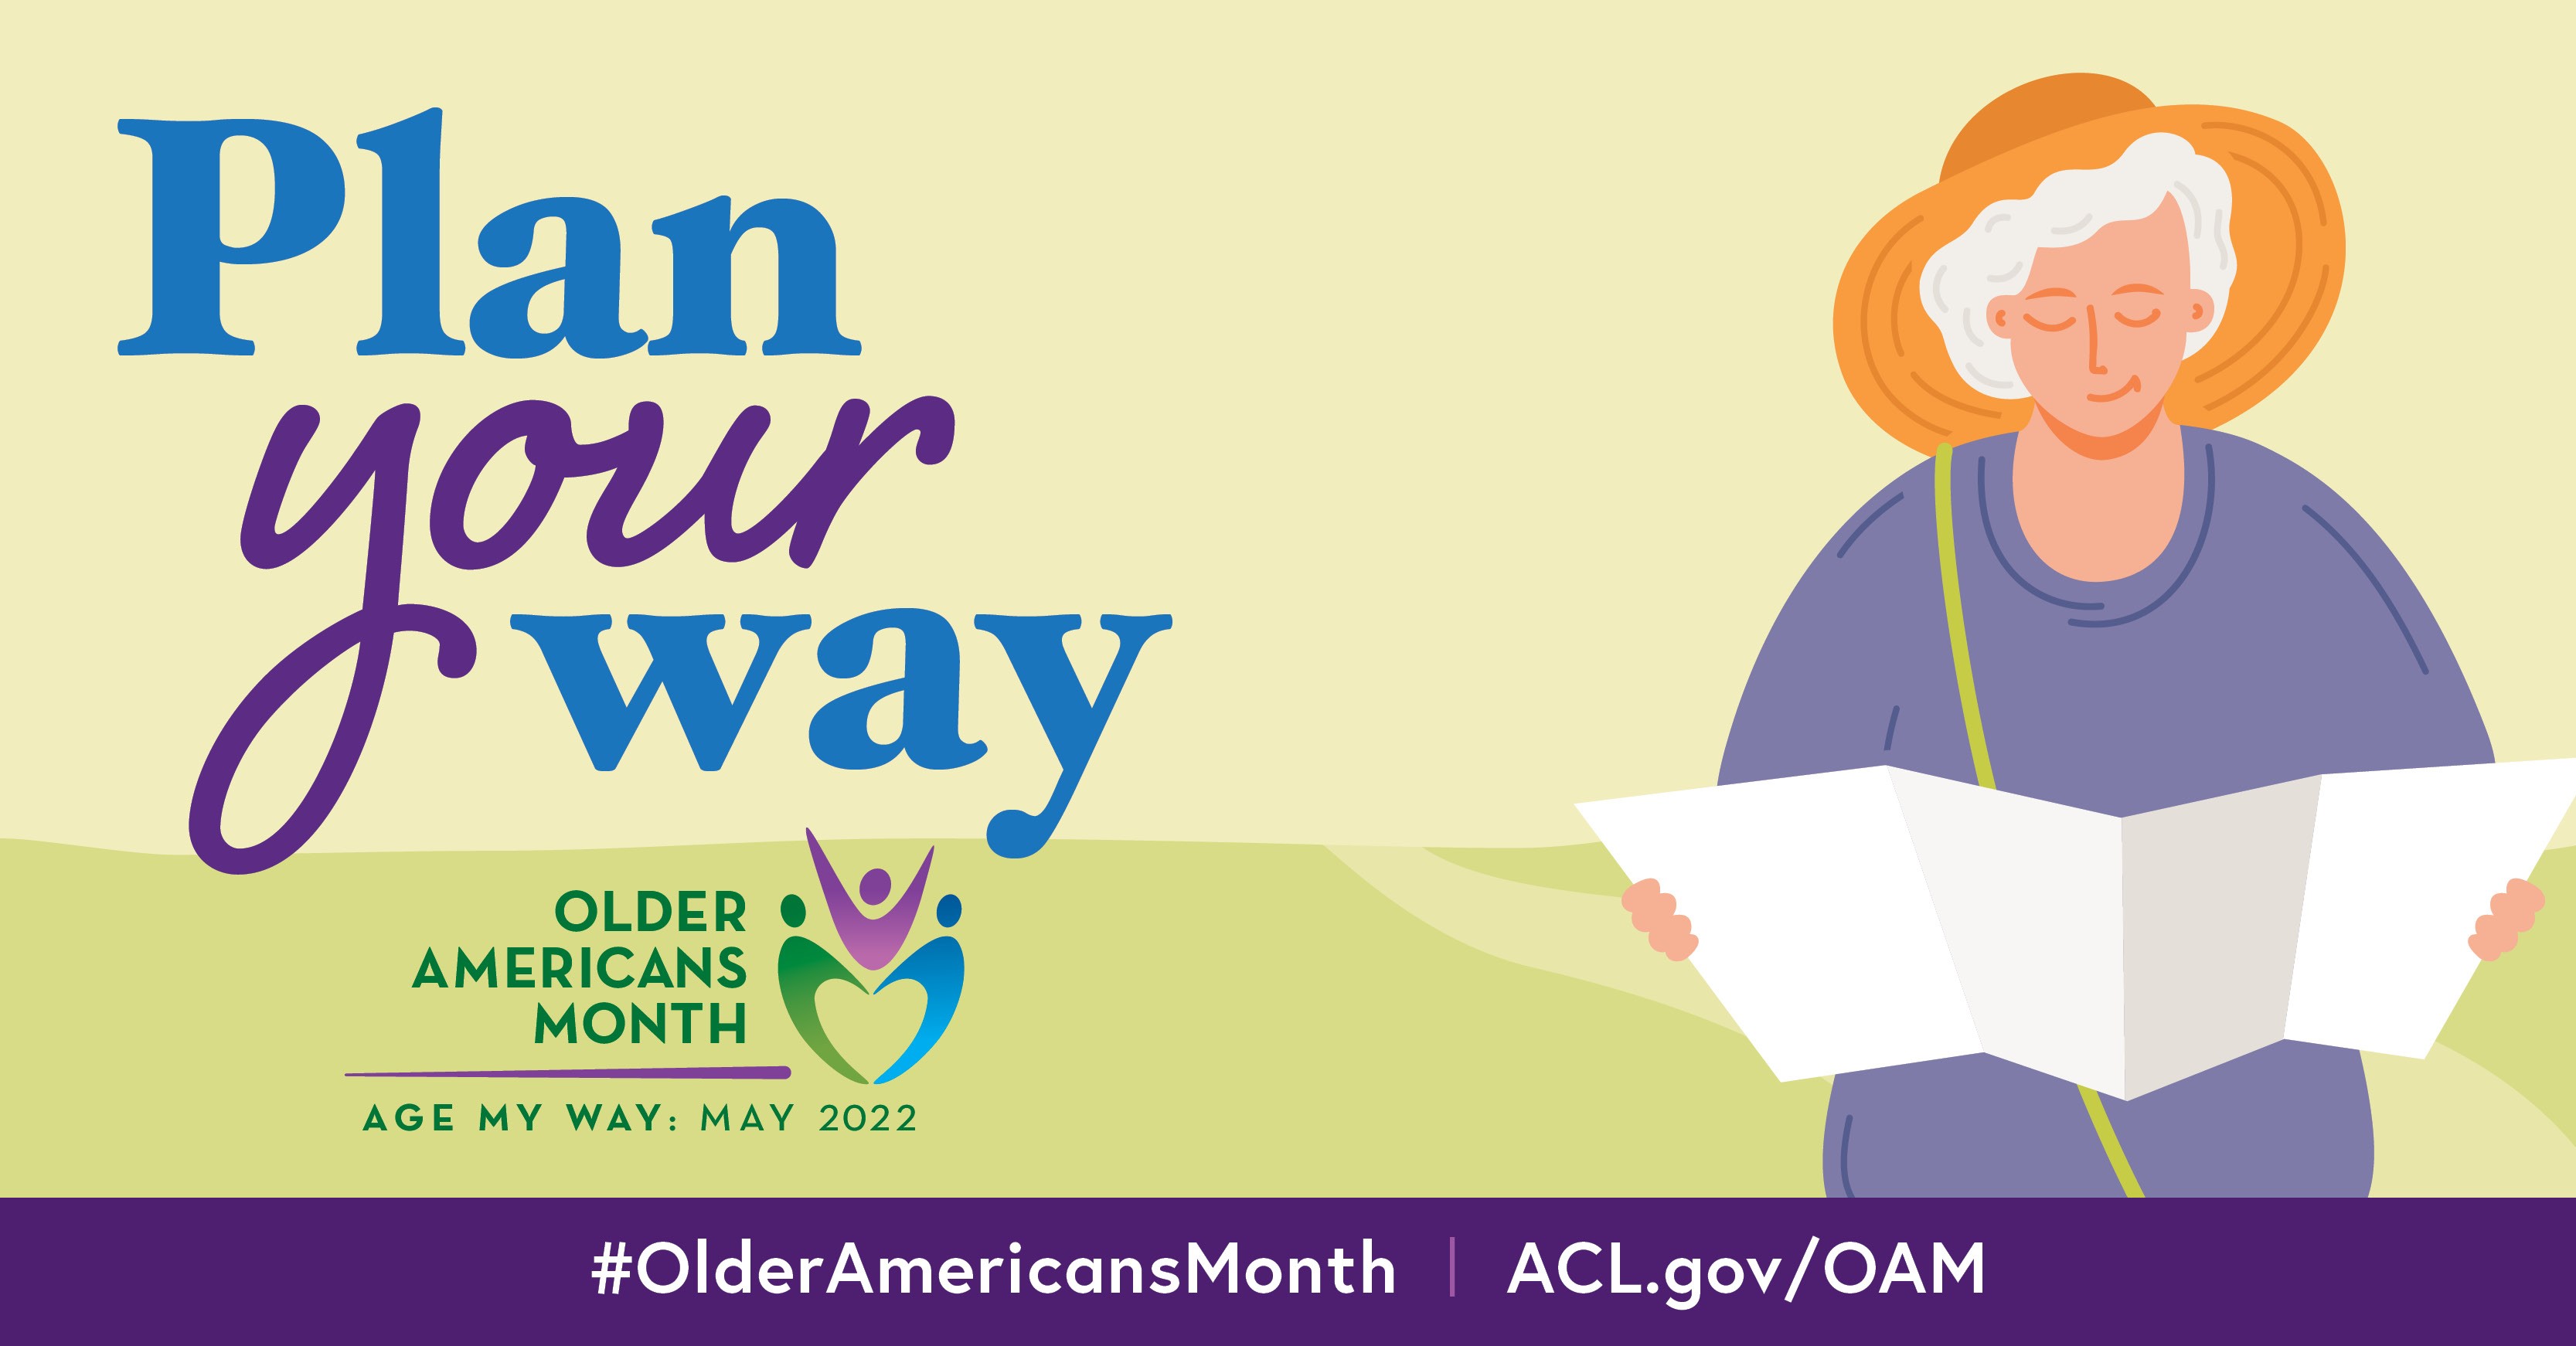 Plan Your Way. Older Americans Month, Age My Way: May 2022. #OlderAmericansMonth ACL.gov/OAM